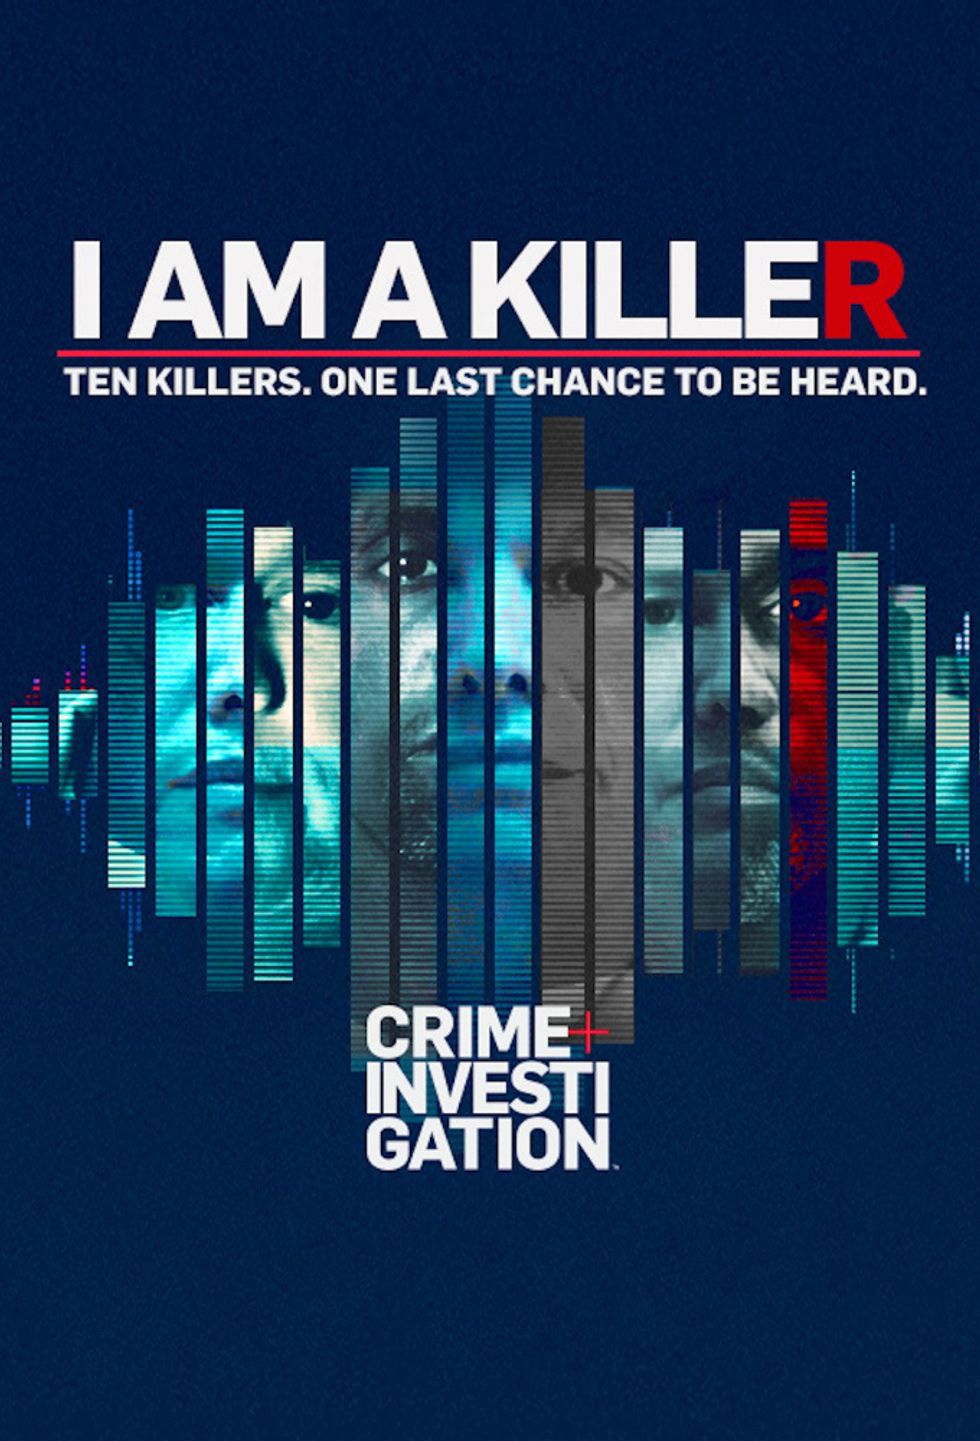 Netflix's "I AM A KILLER" Is Sure To Knock Your Socks Off